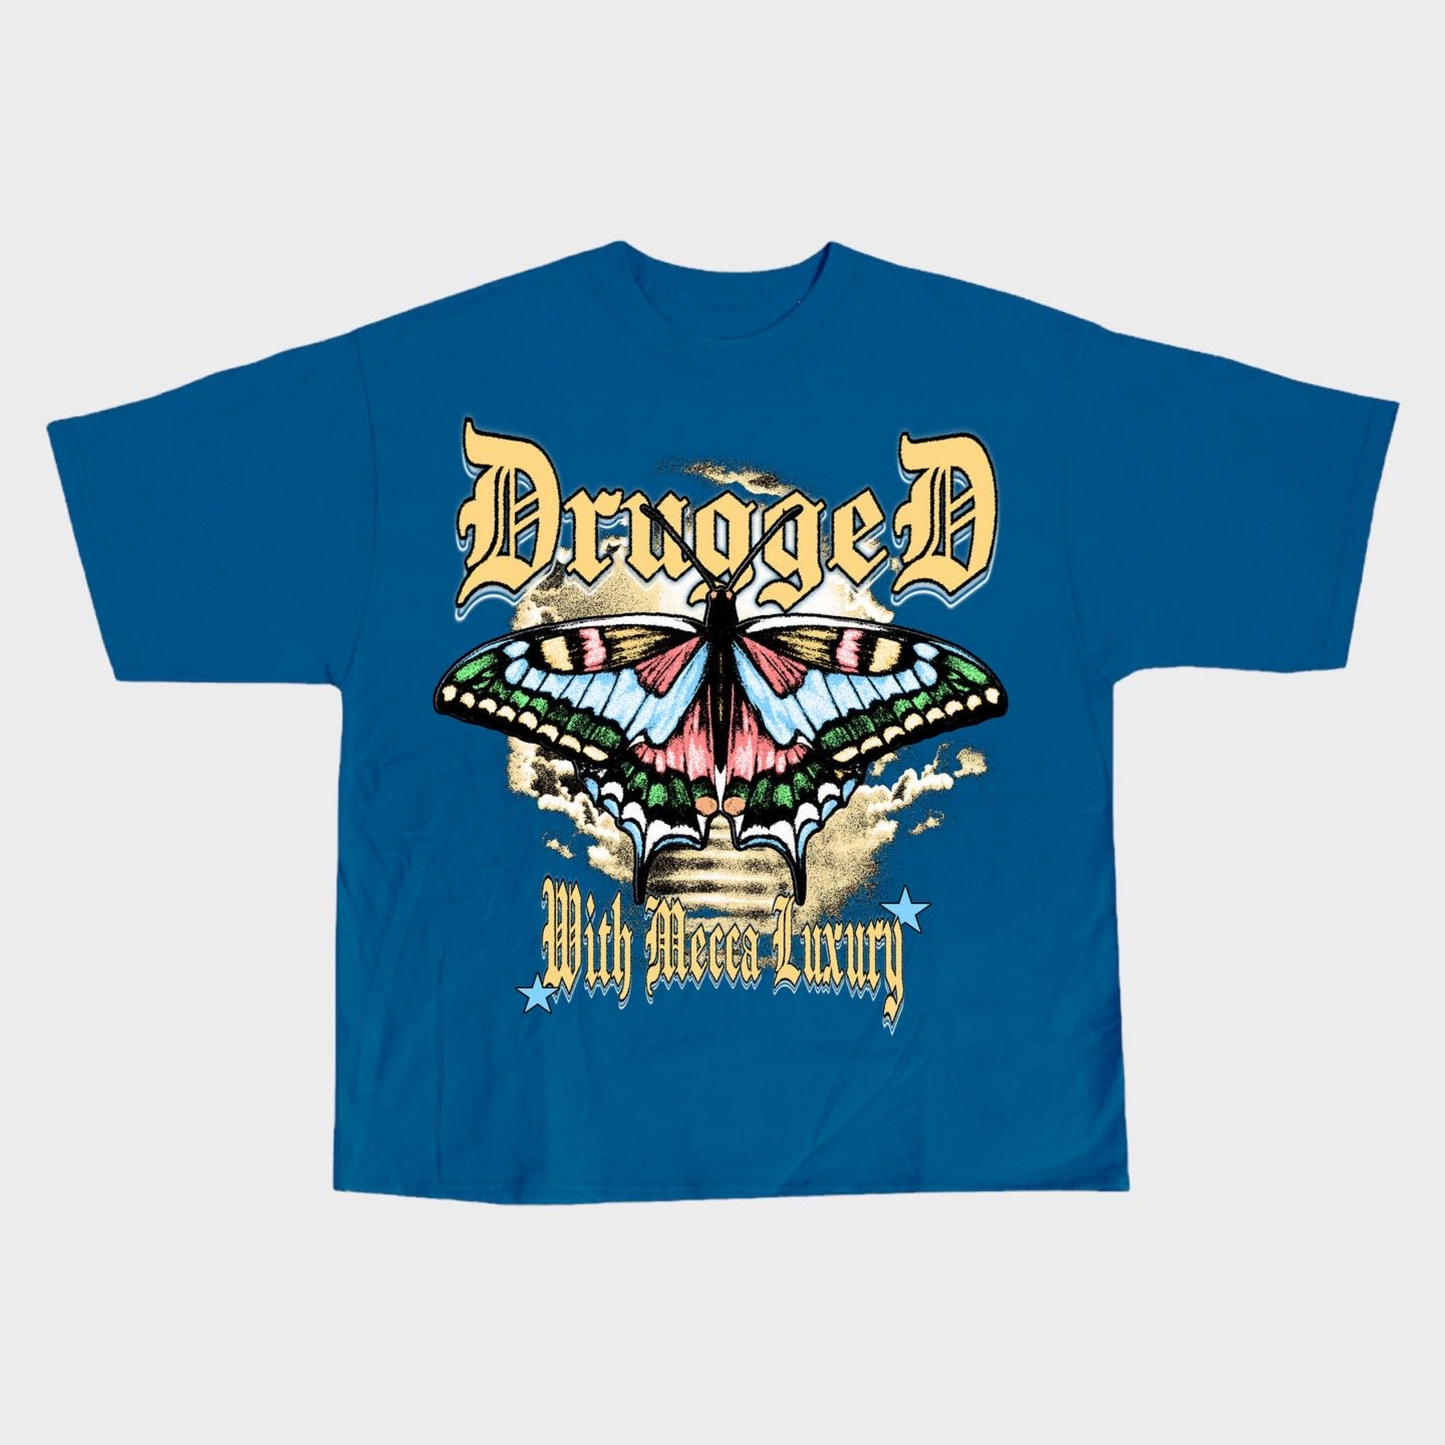 "Drugged With Mecca Luxury" T-Shirt